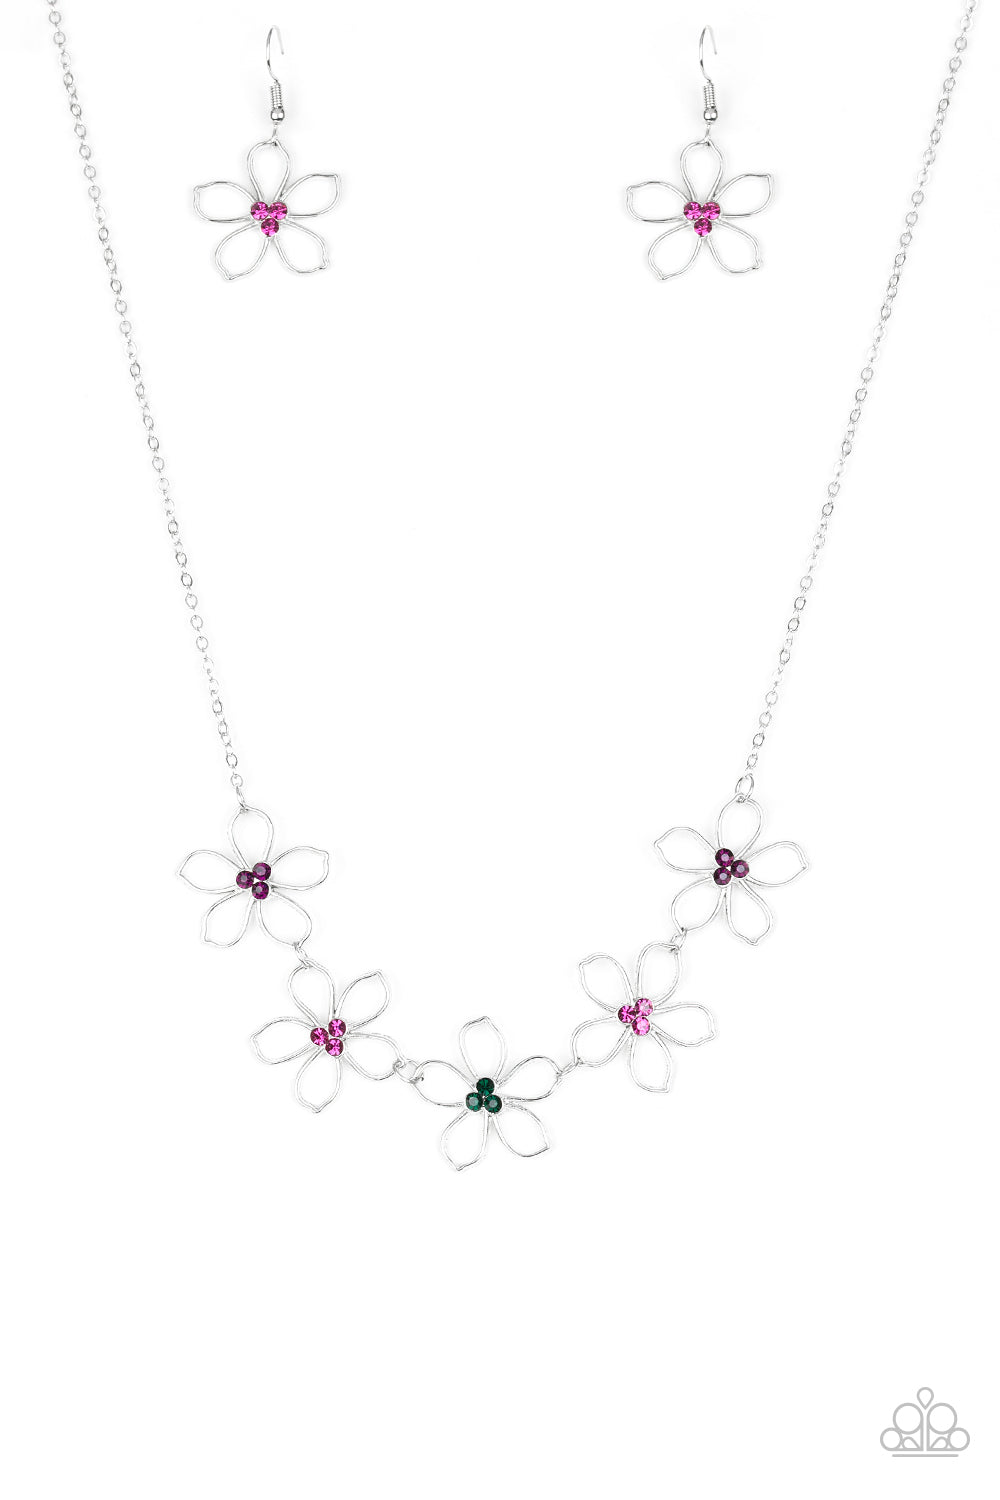 Hoppin Hibiscus Multi Necklace - Paparazzi Accessories  Dotted with radiant multicolored rhinestone centers, airy silver flowers link below the collar for a seasonal look. Features an adjustable clasp closure.  All Paparazzi Accessories are lead free and nickel free!  Sold as one individual necklace. Includes one pair of matching earrings.